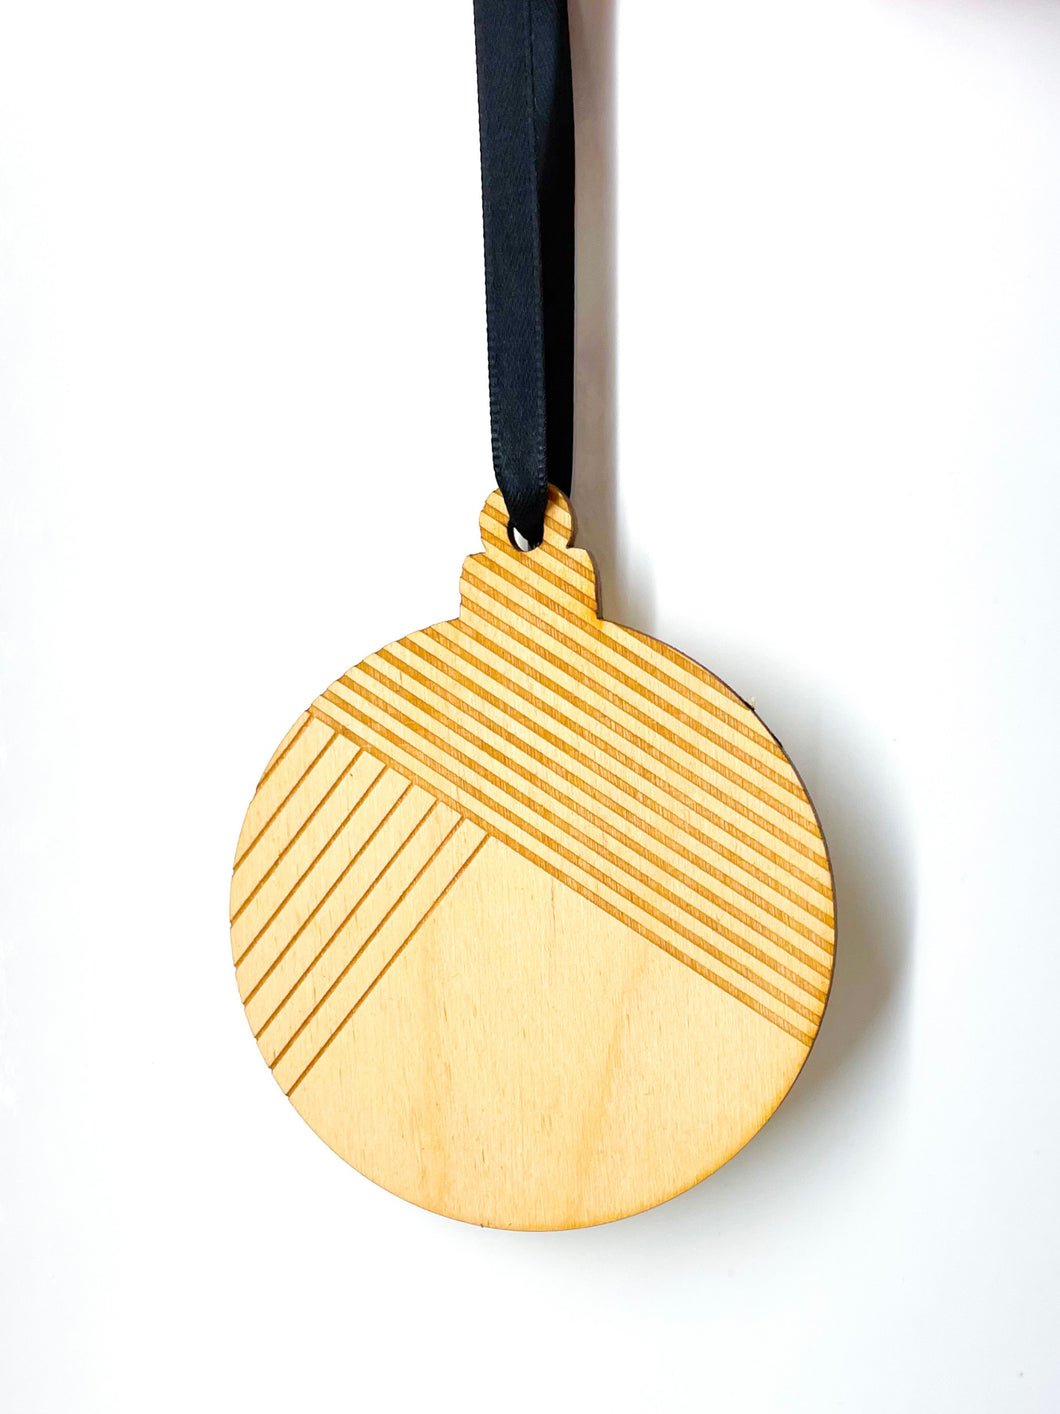 Wood ornament with lines